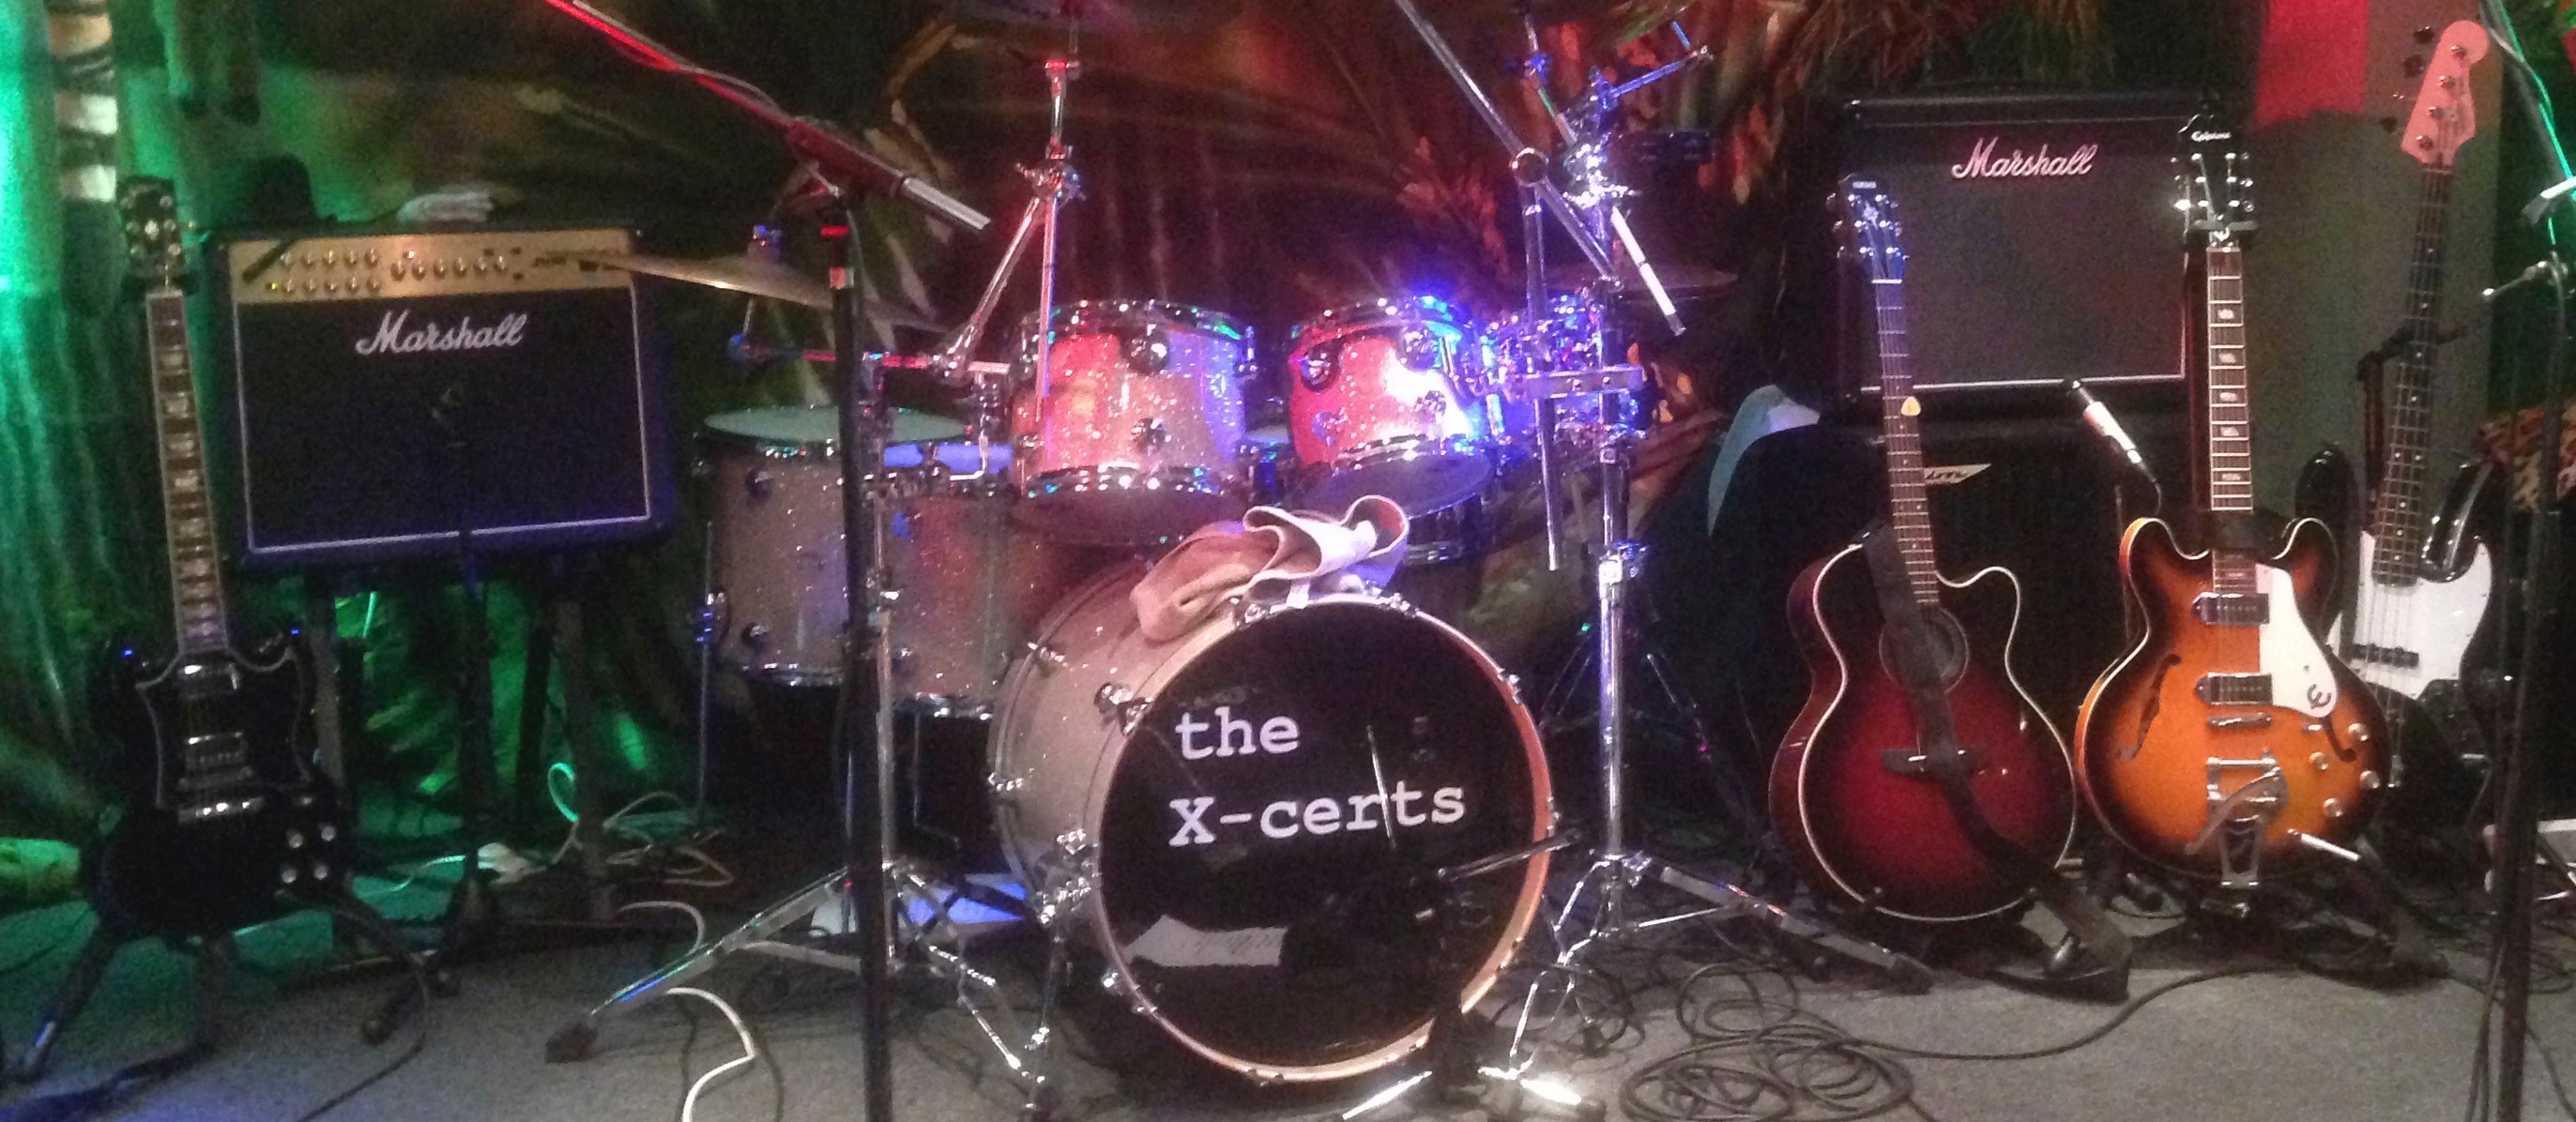 The X-Certs